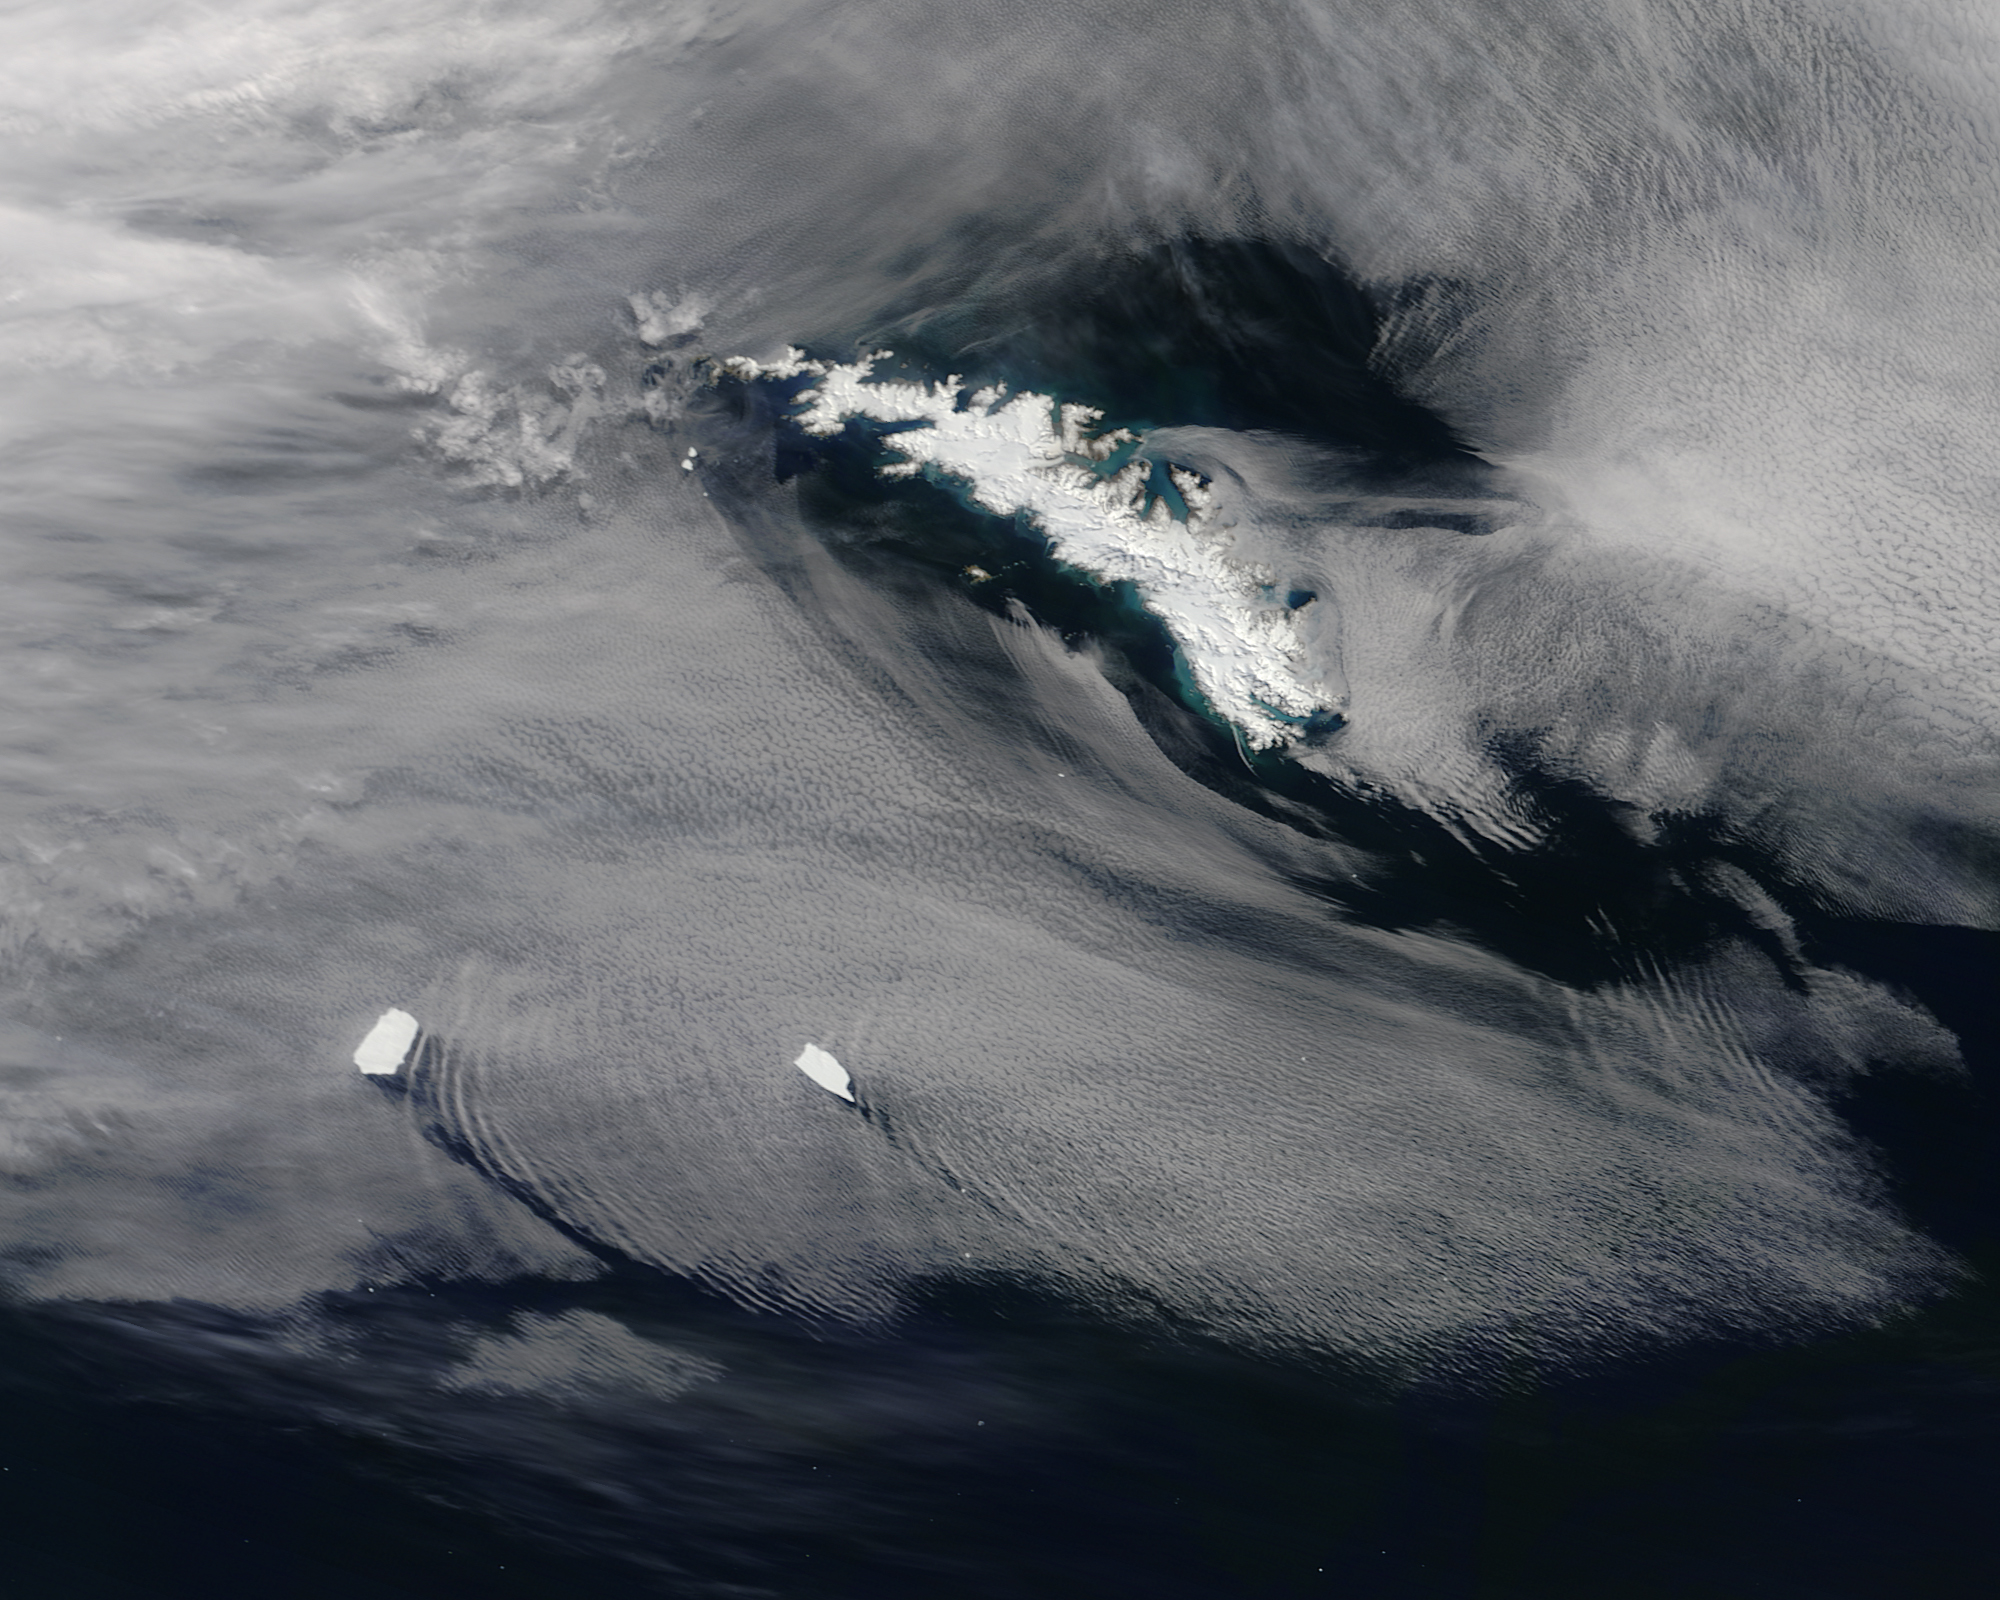 Icebergs Make Waves off South Georgia Island - related image preview